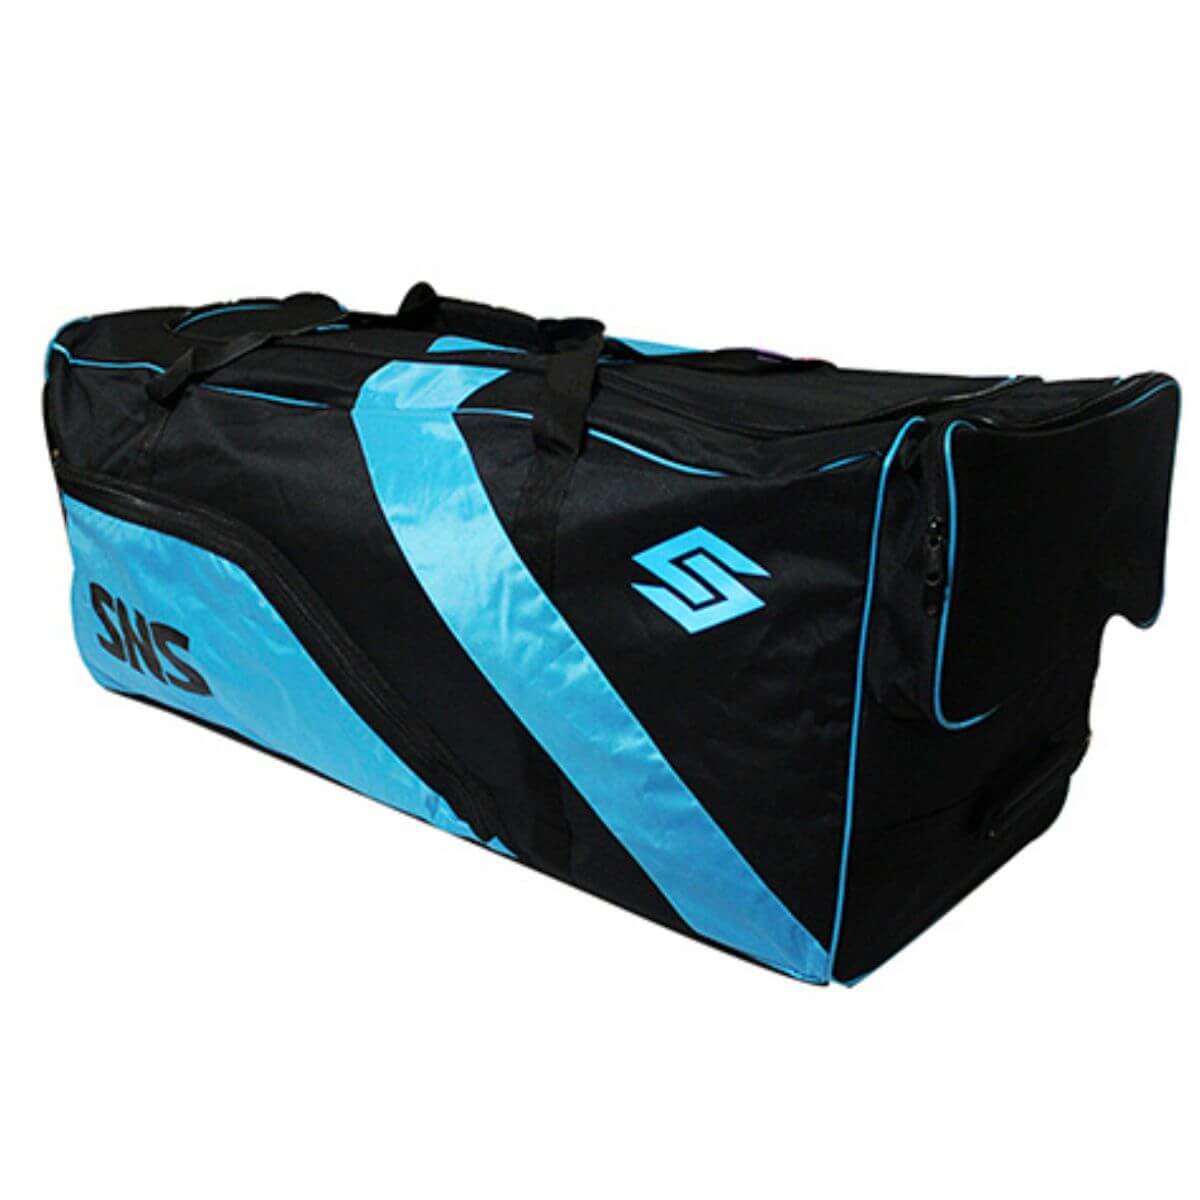 Source Hot Selling Premium Polyester Hockey Kit Bag with Unique Wardrobe  Design Holds All Gear from Indian Manufacturer on m.alibaba.com